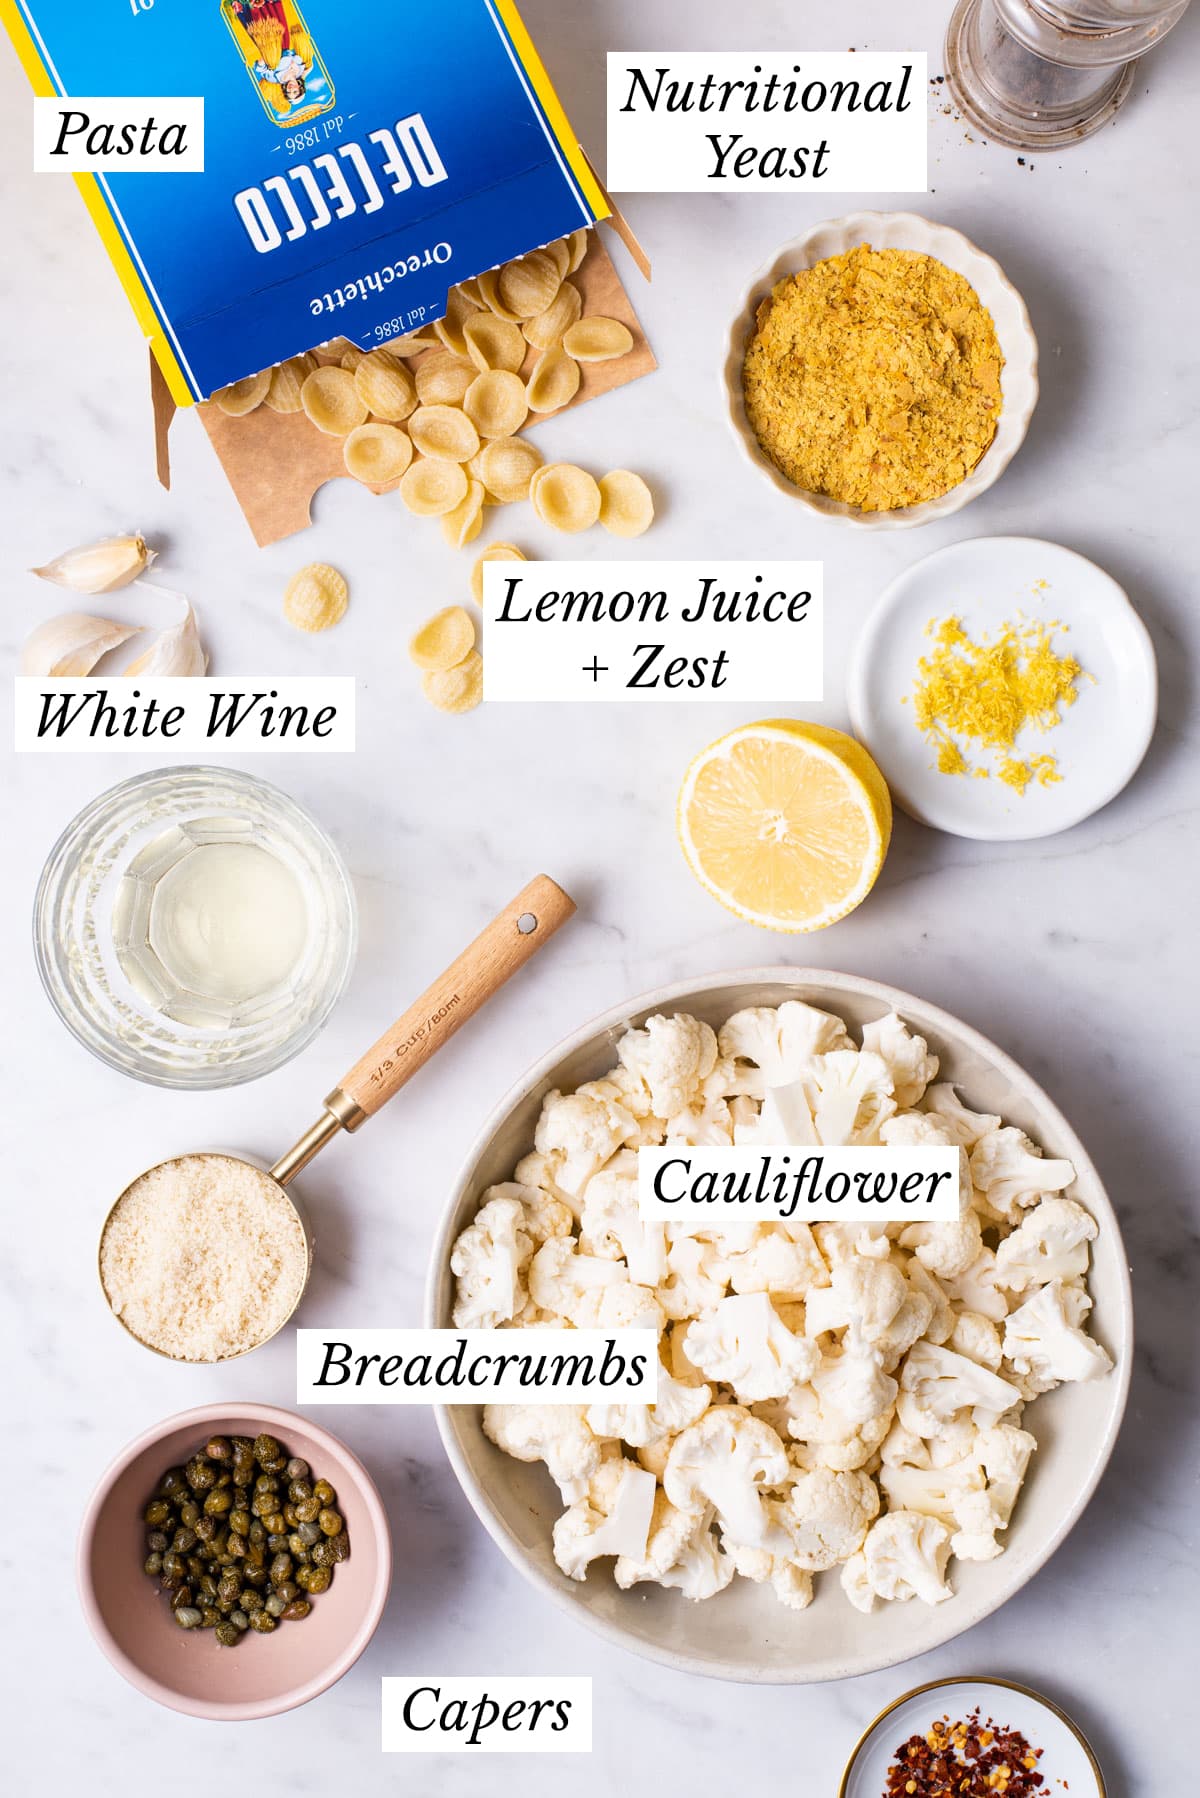 Ingredients gathered to make lemony pasta with cauliflower and fried breadcrumbs.